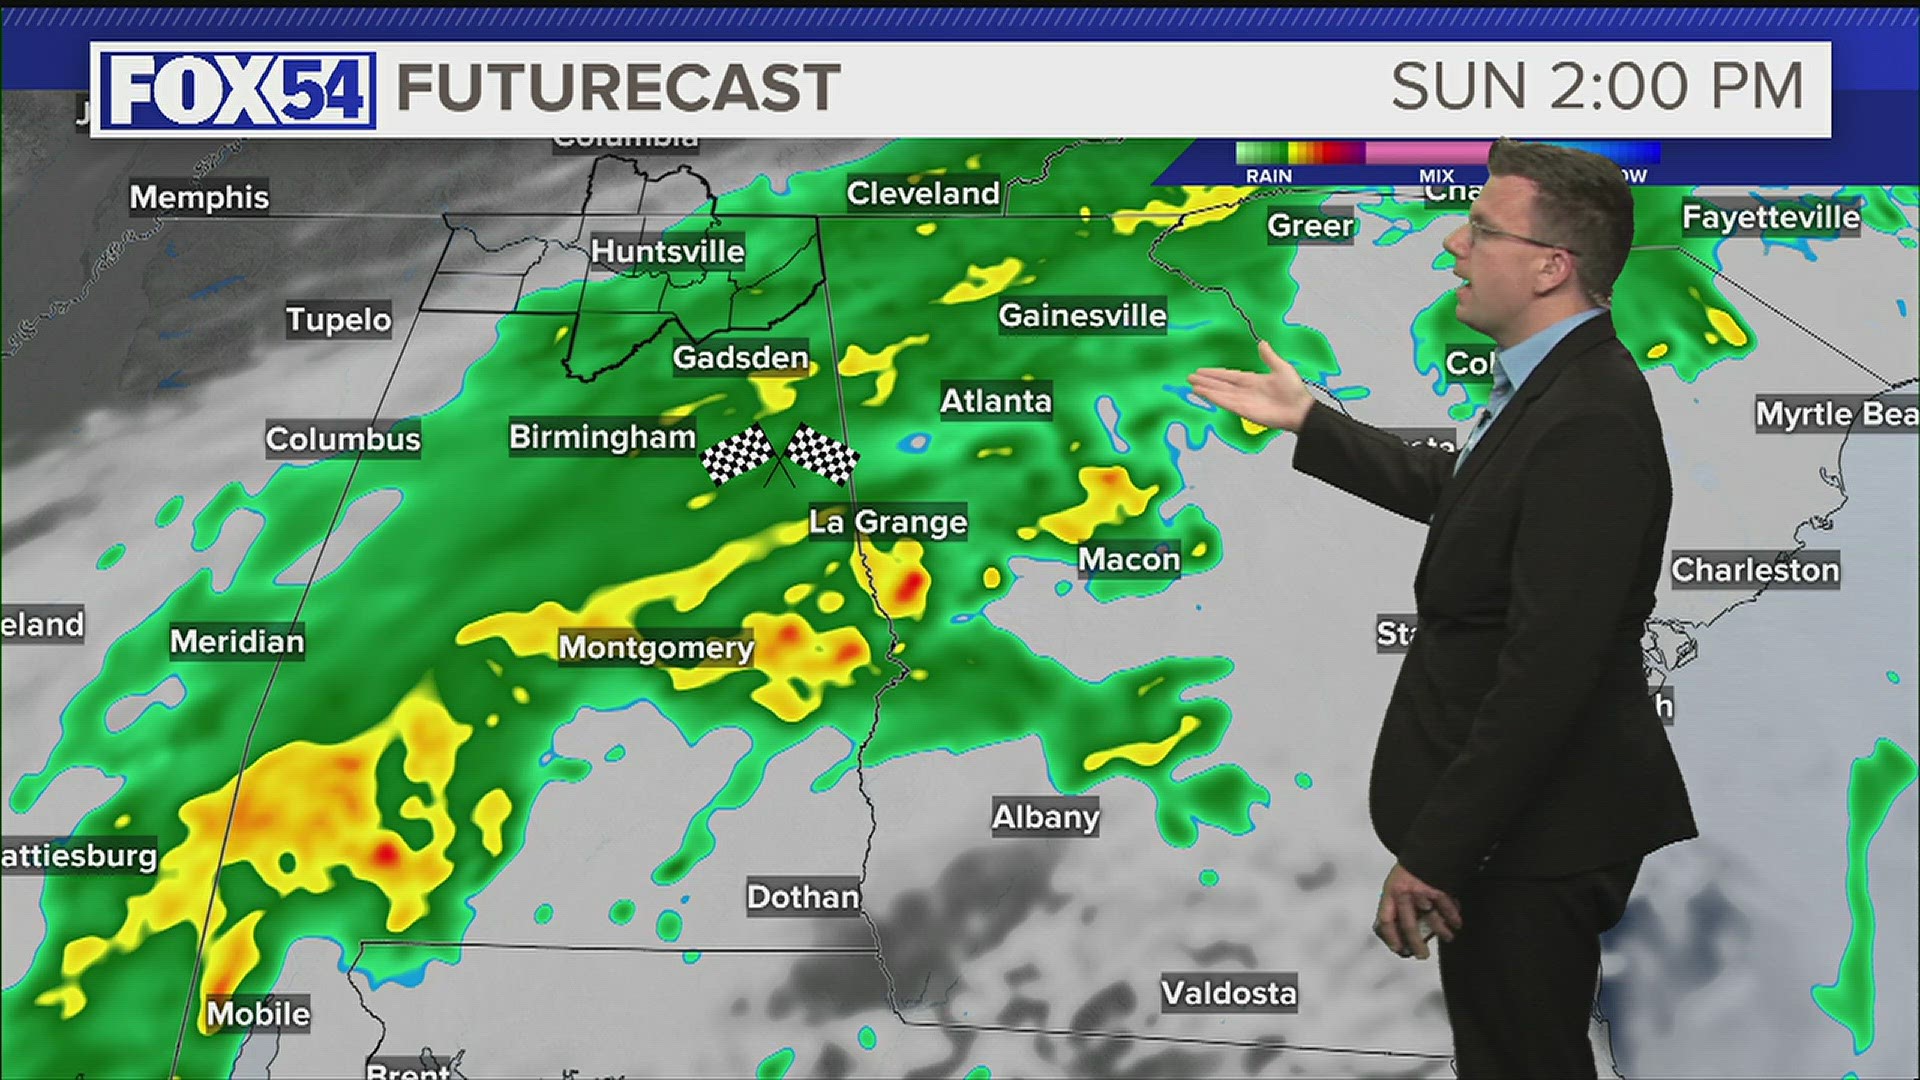 Showers and storms stay in the forecast this weekend.